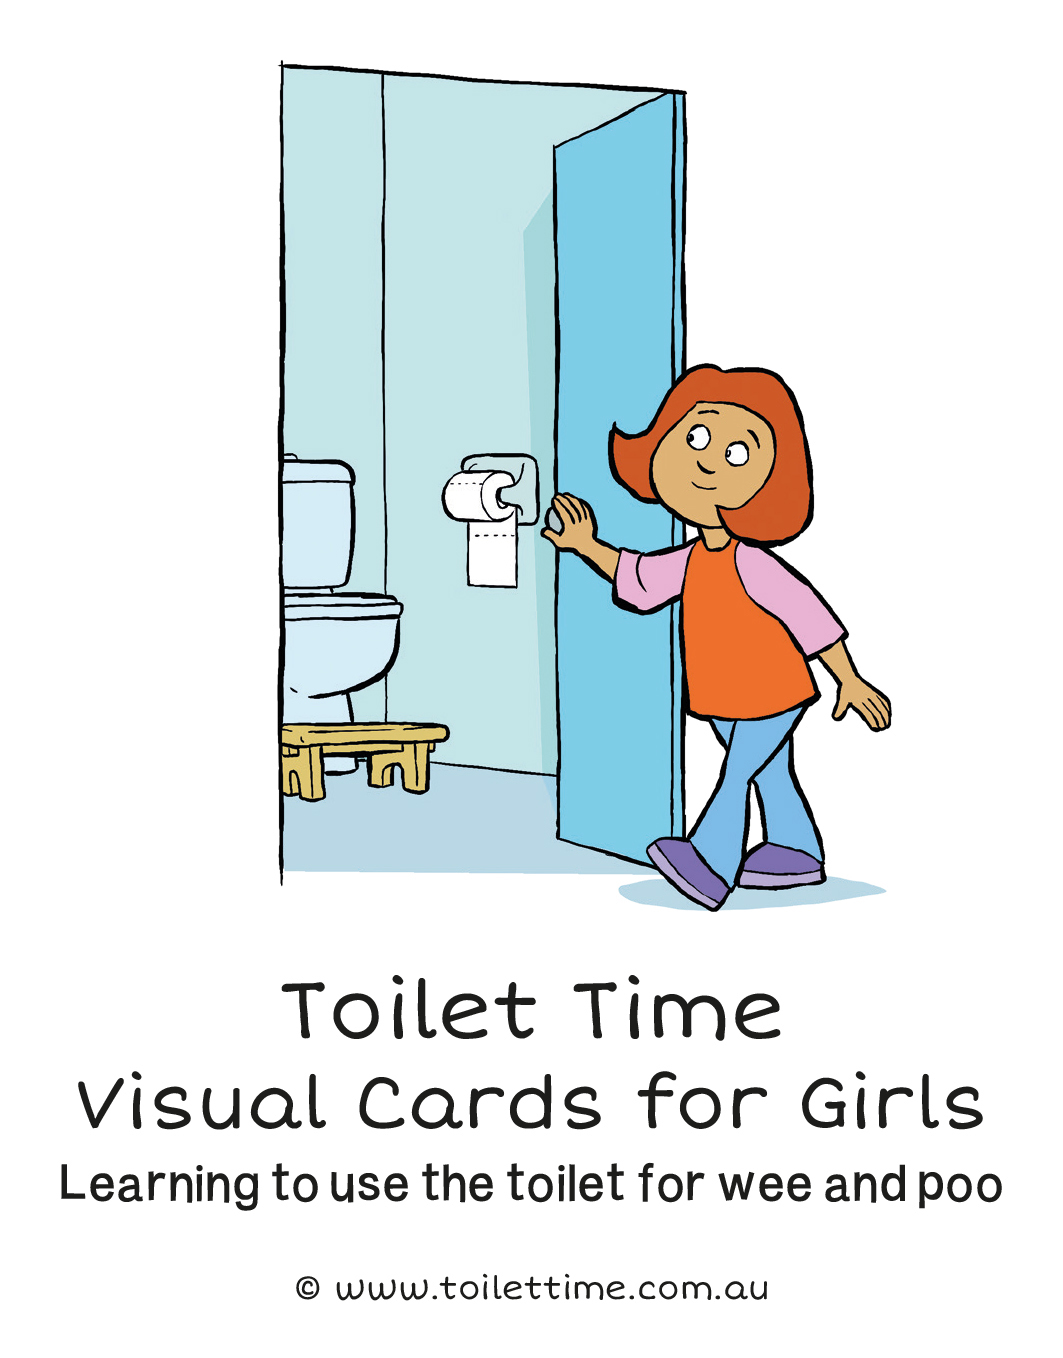 Toilet Time: Visual cards for girls learning to use the toilet for wee and poo